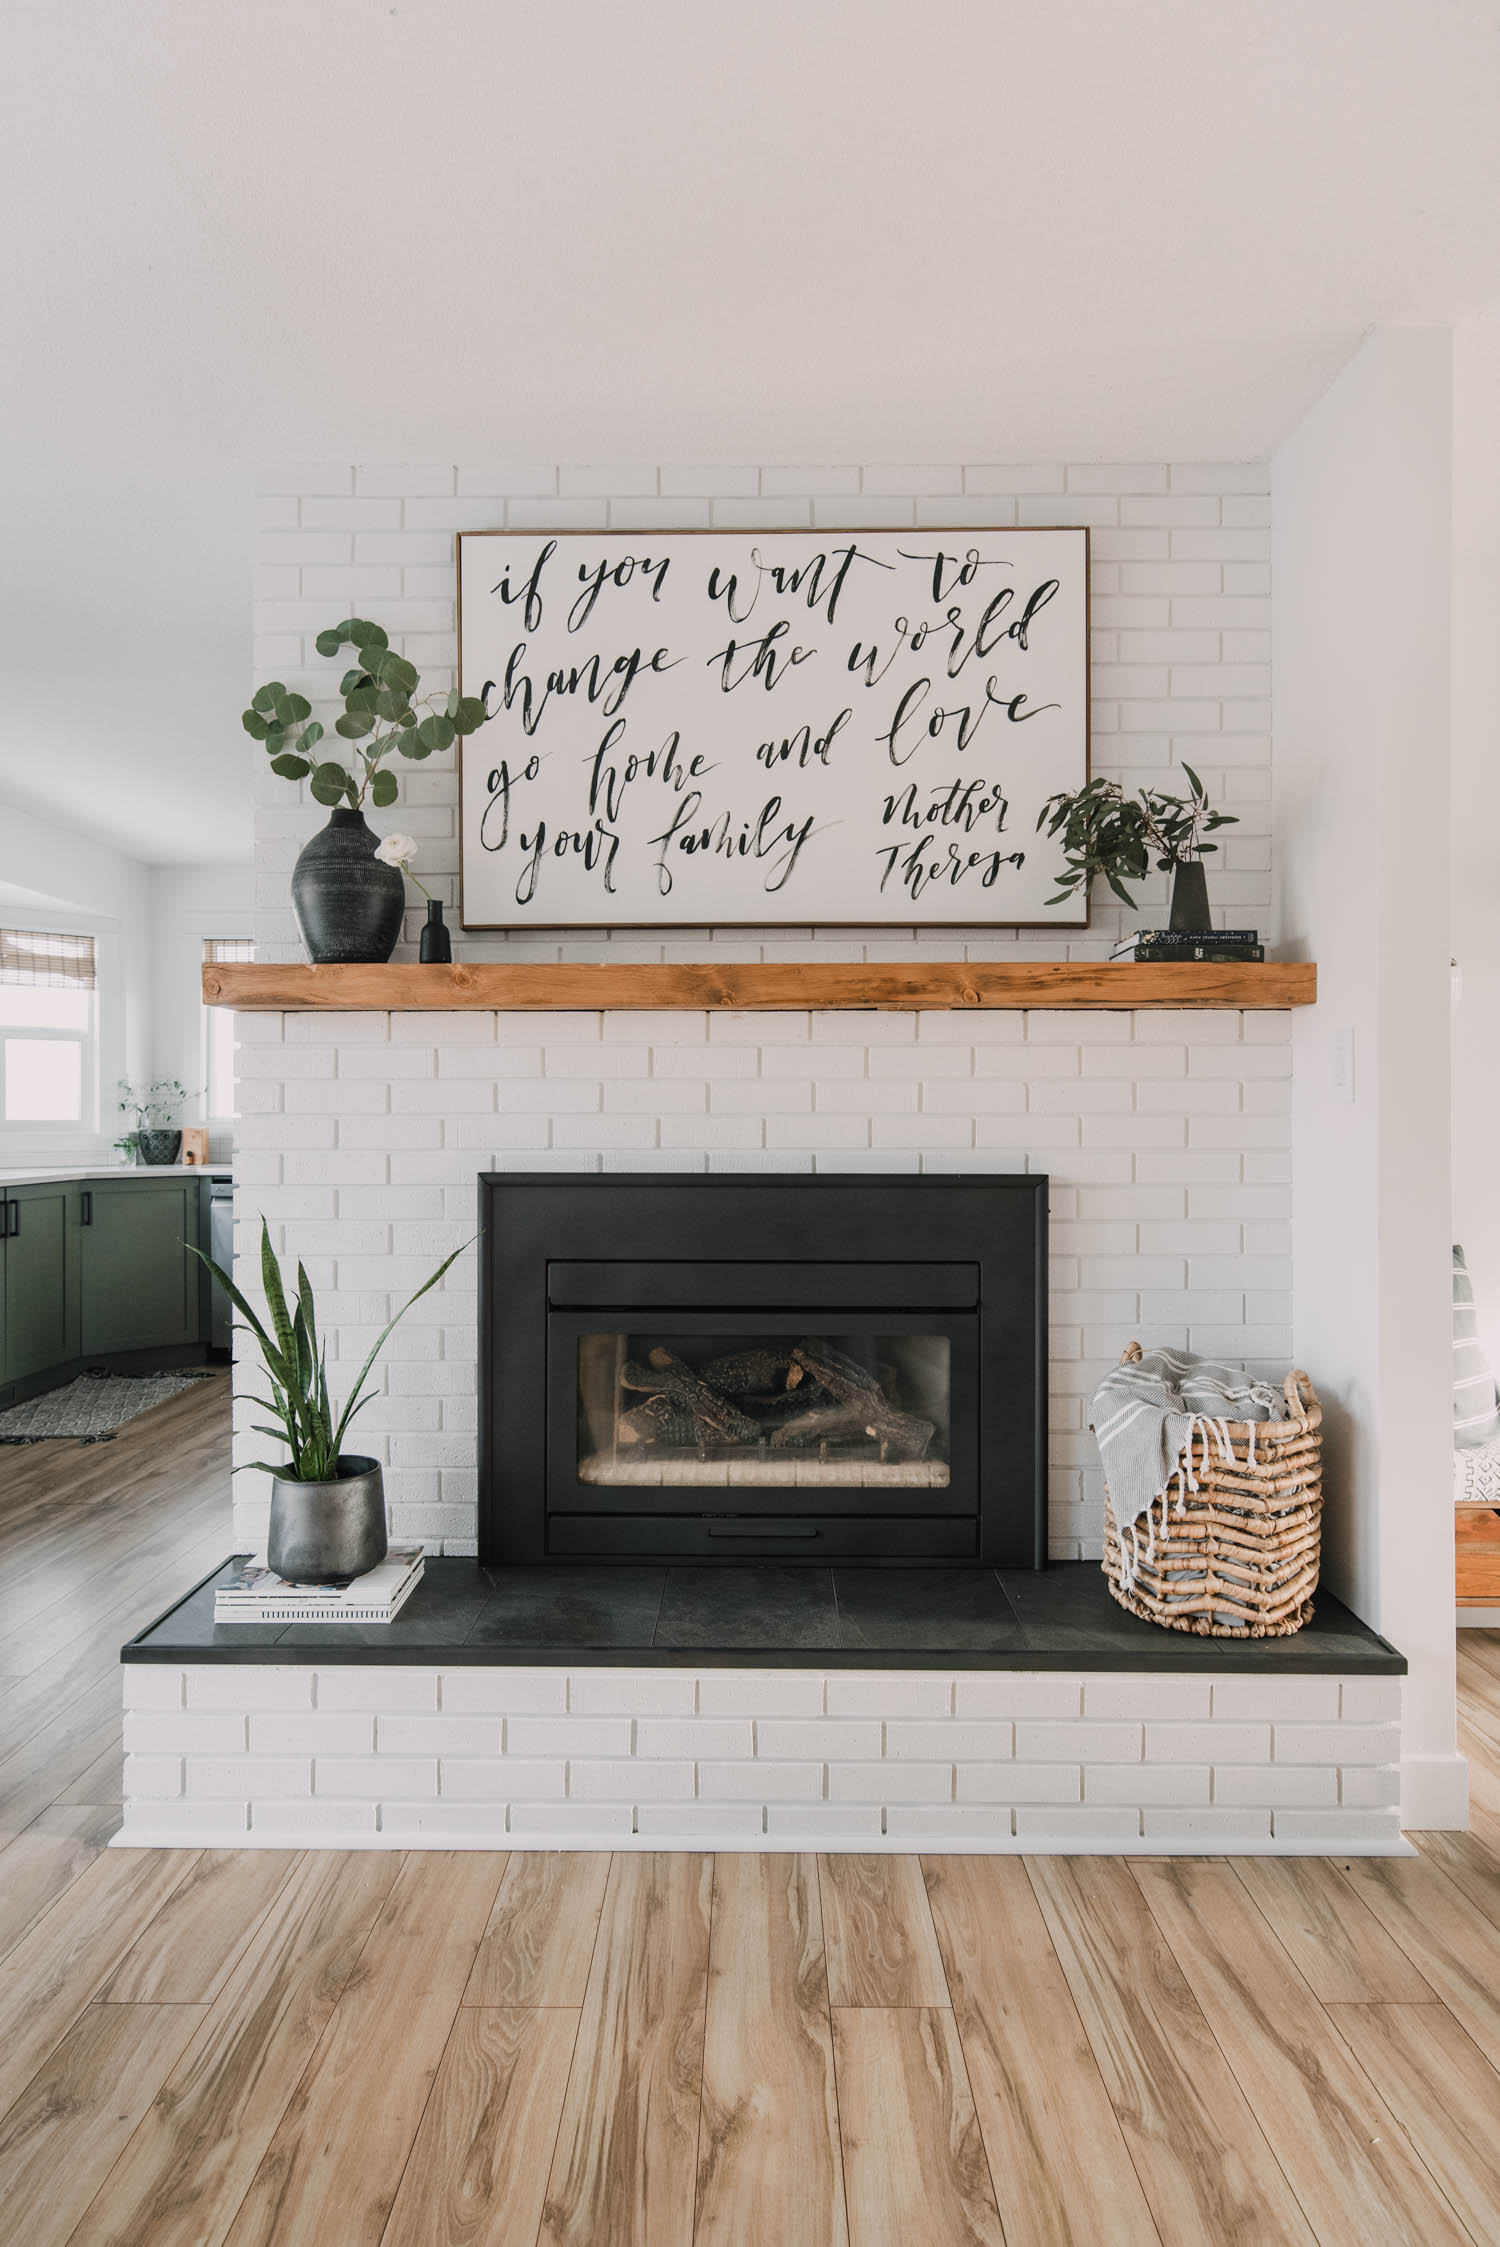 How To Tile A Fireplace Hearth - bmp-clown